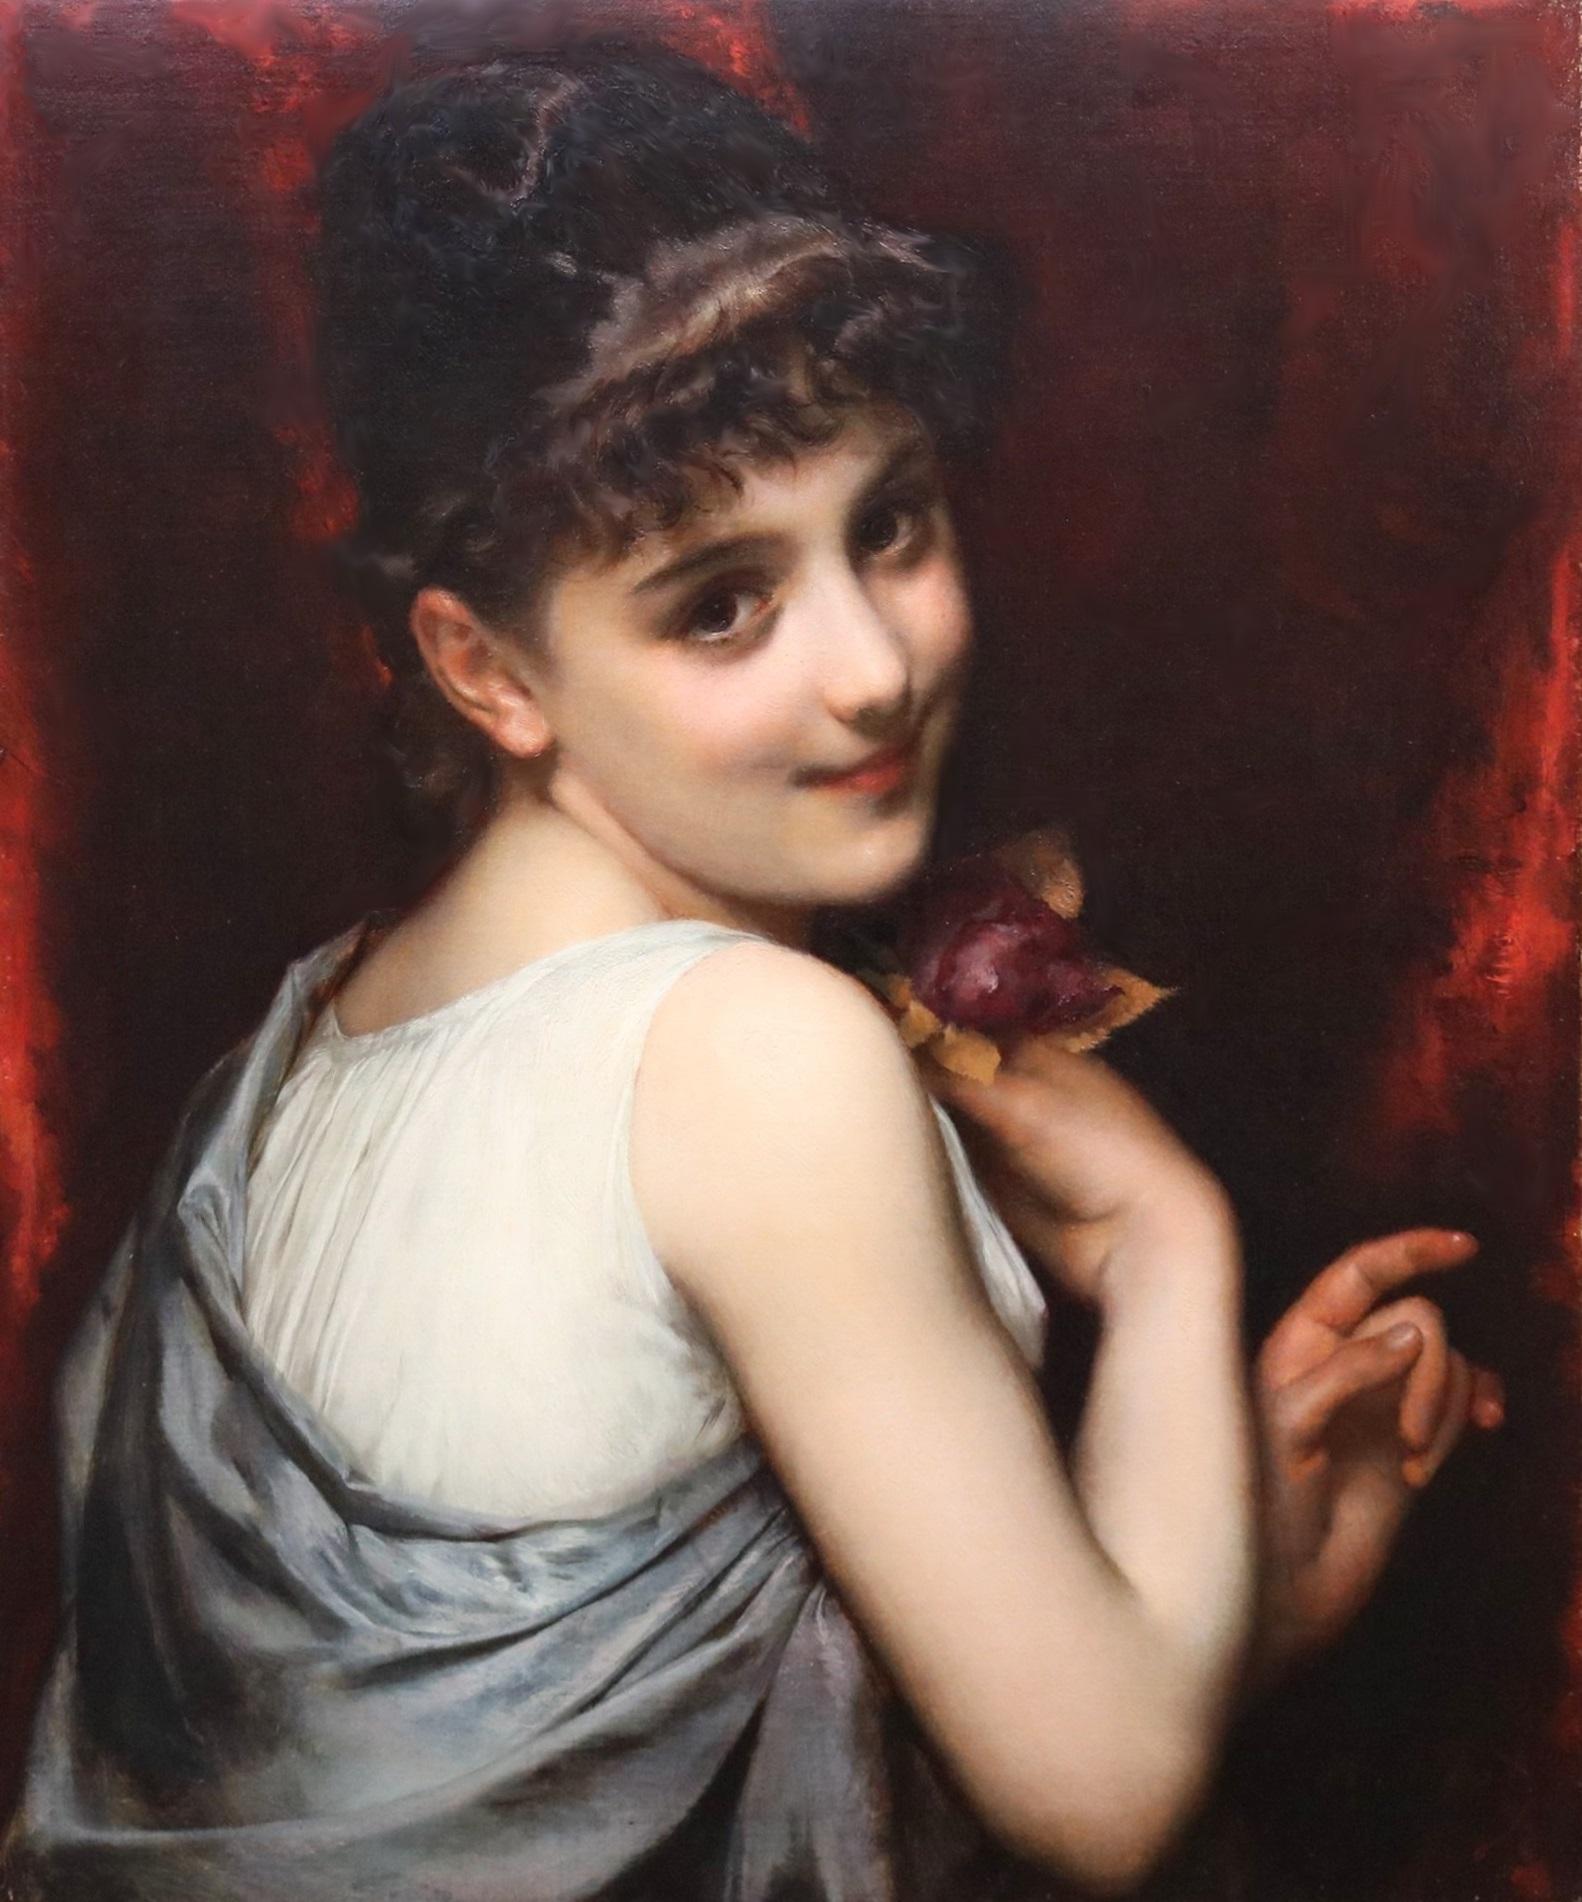 Young Belle Epoque Beauty 19th Century Portrait Oil Painting French Flower Girl  For Sale 1